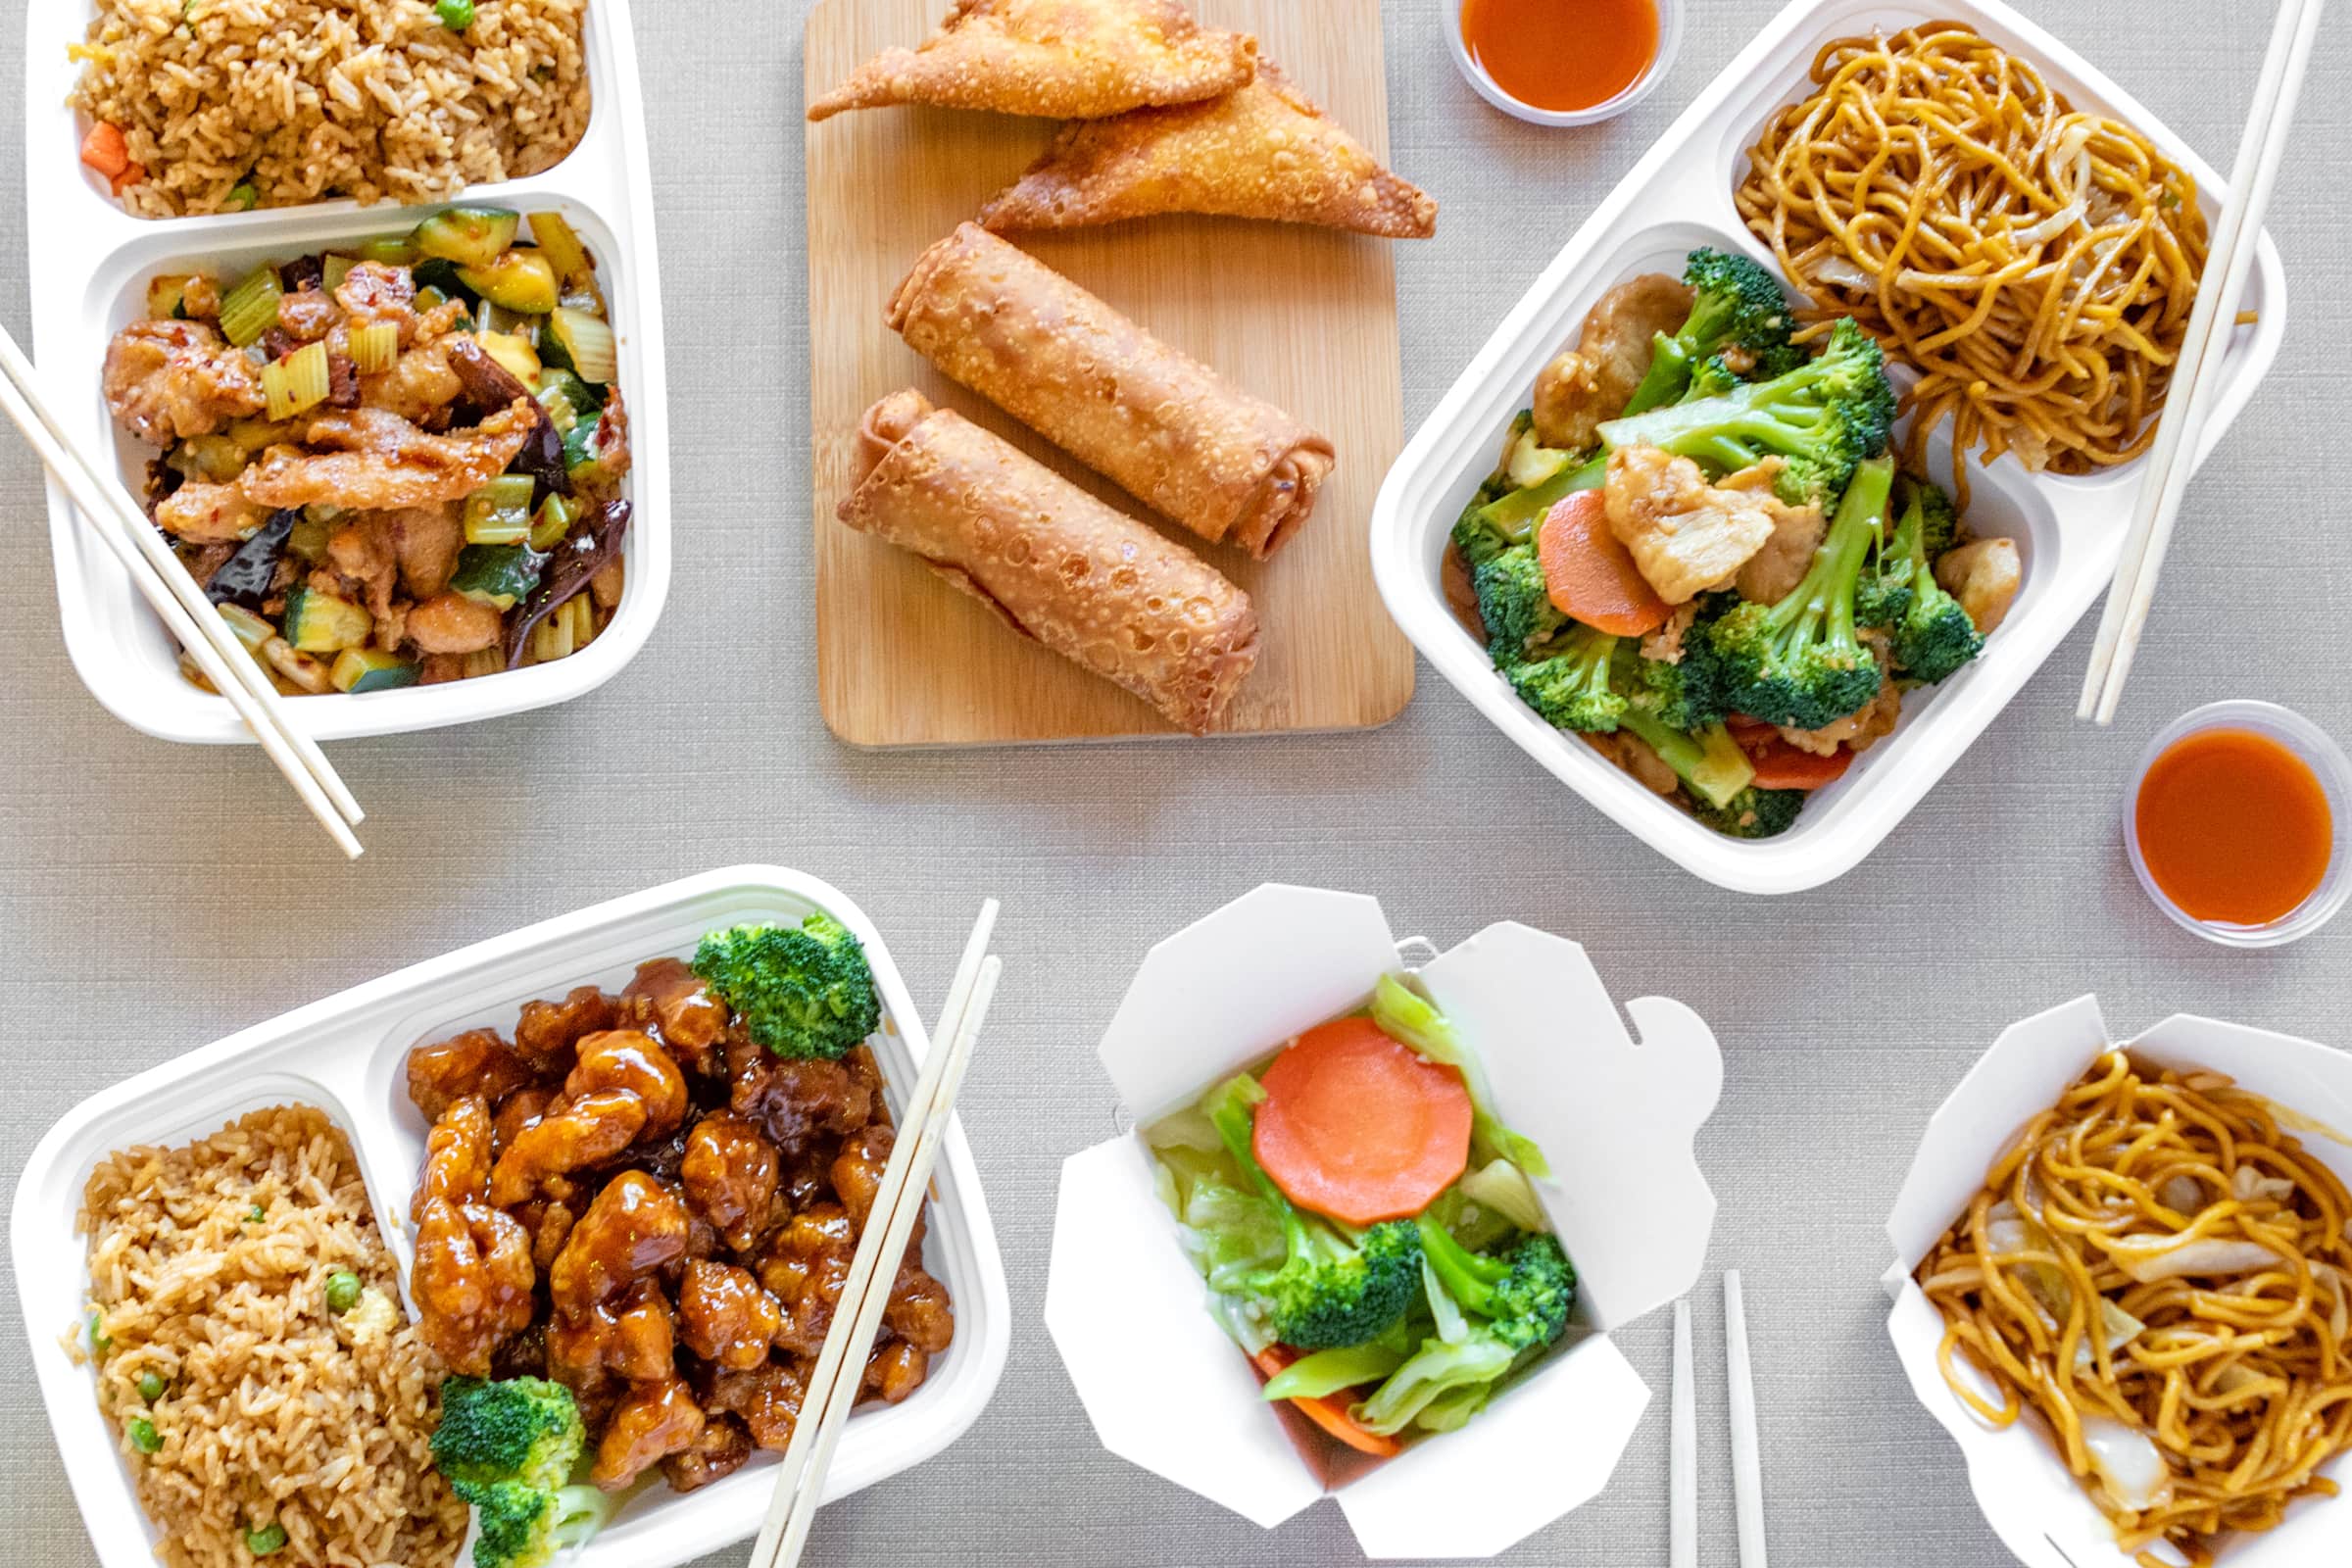 14 Healthiest Chinese Food Dishes, According to Dietitians